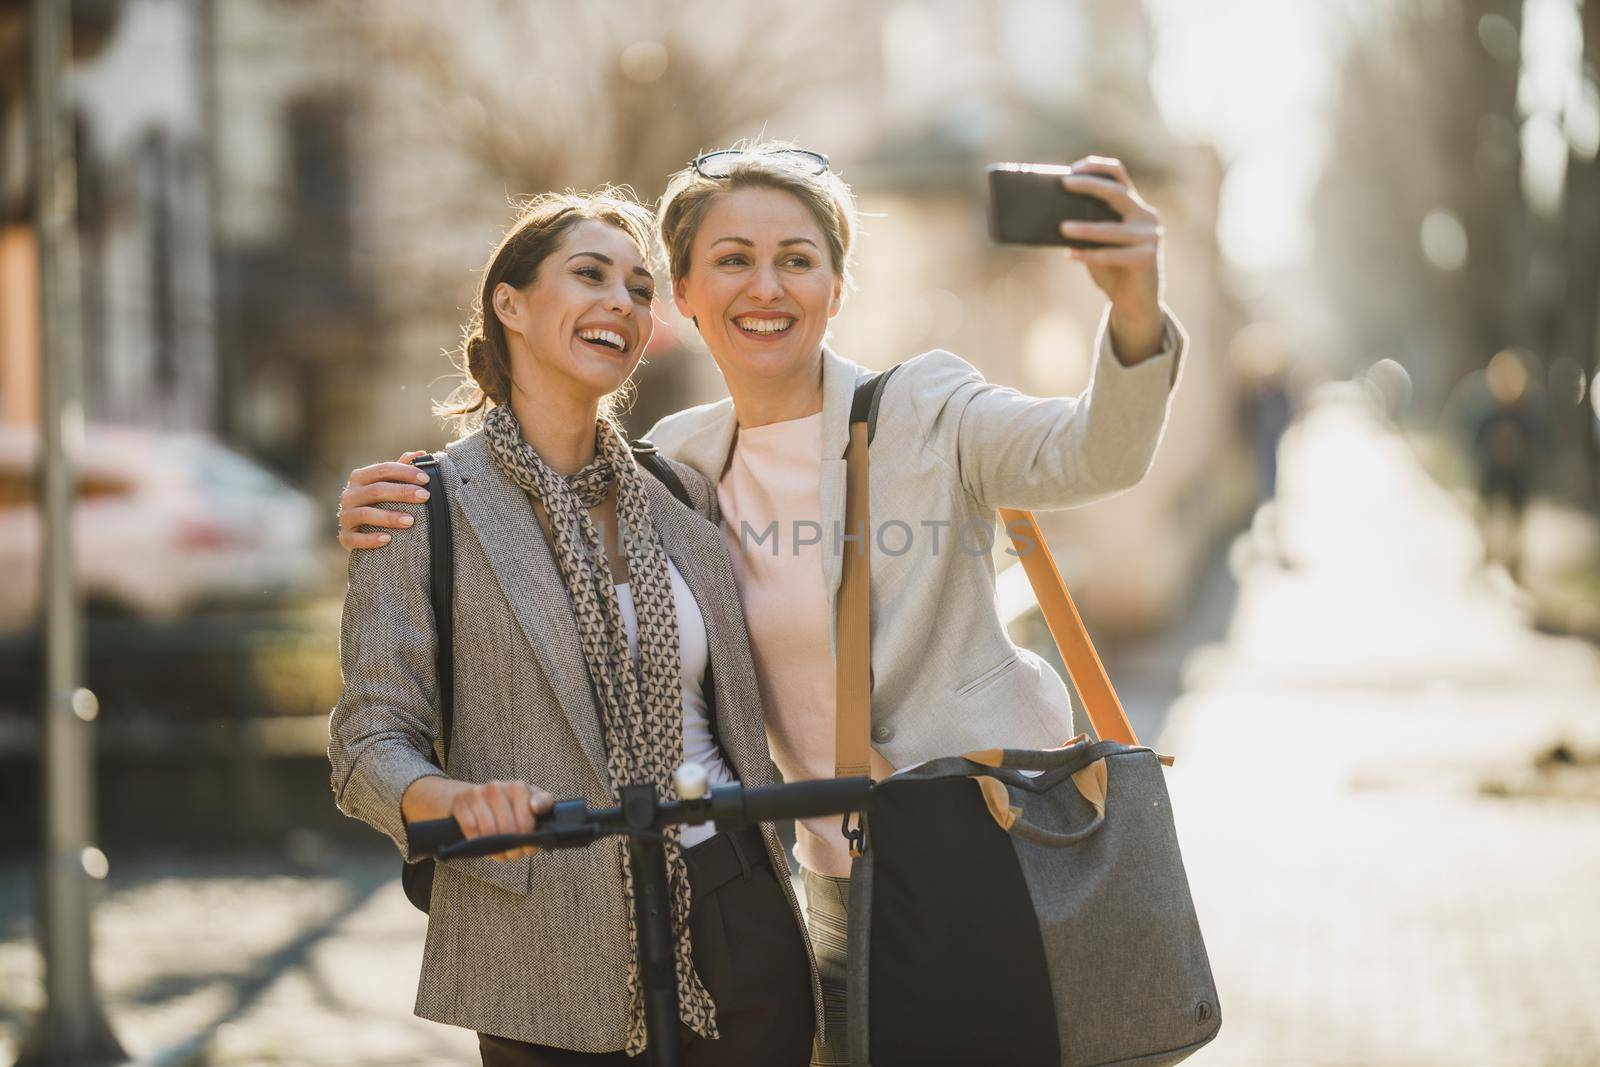 A two successful businesswomen taking a selfie with smartphone while walking through the city.